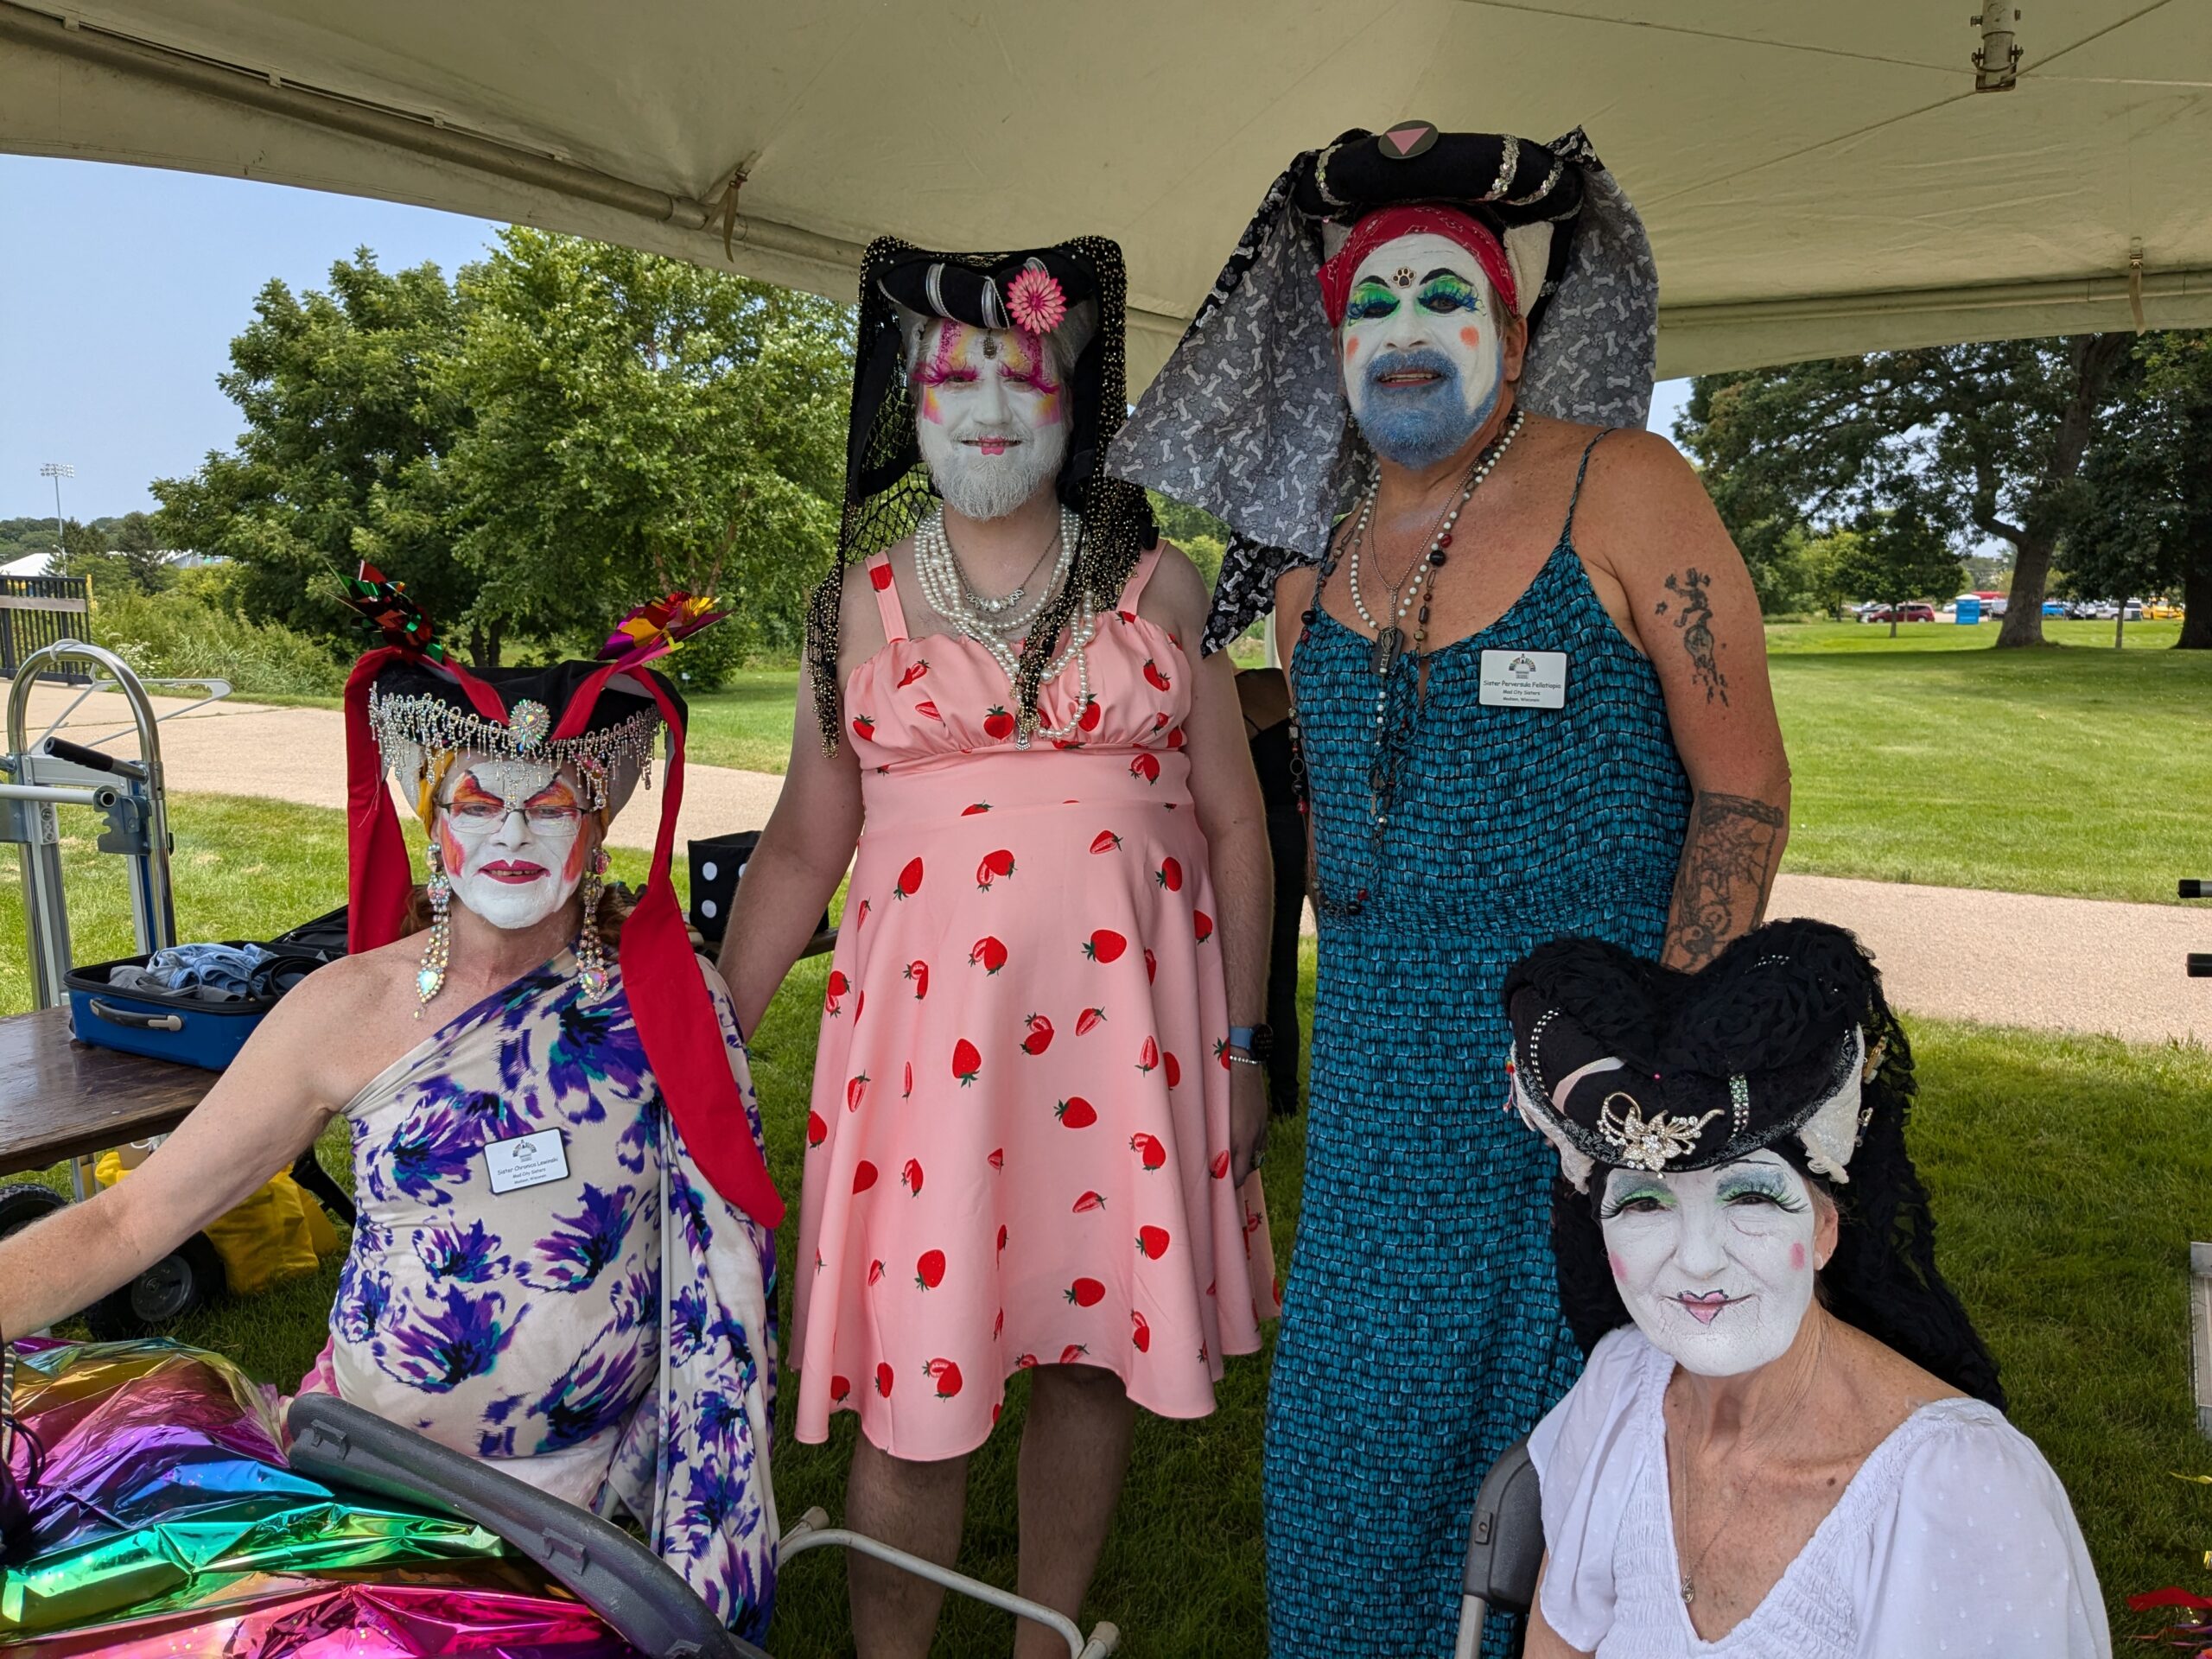 Four people in colorful makeup and dresses pose for the camera under an event tent in a park